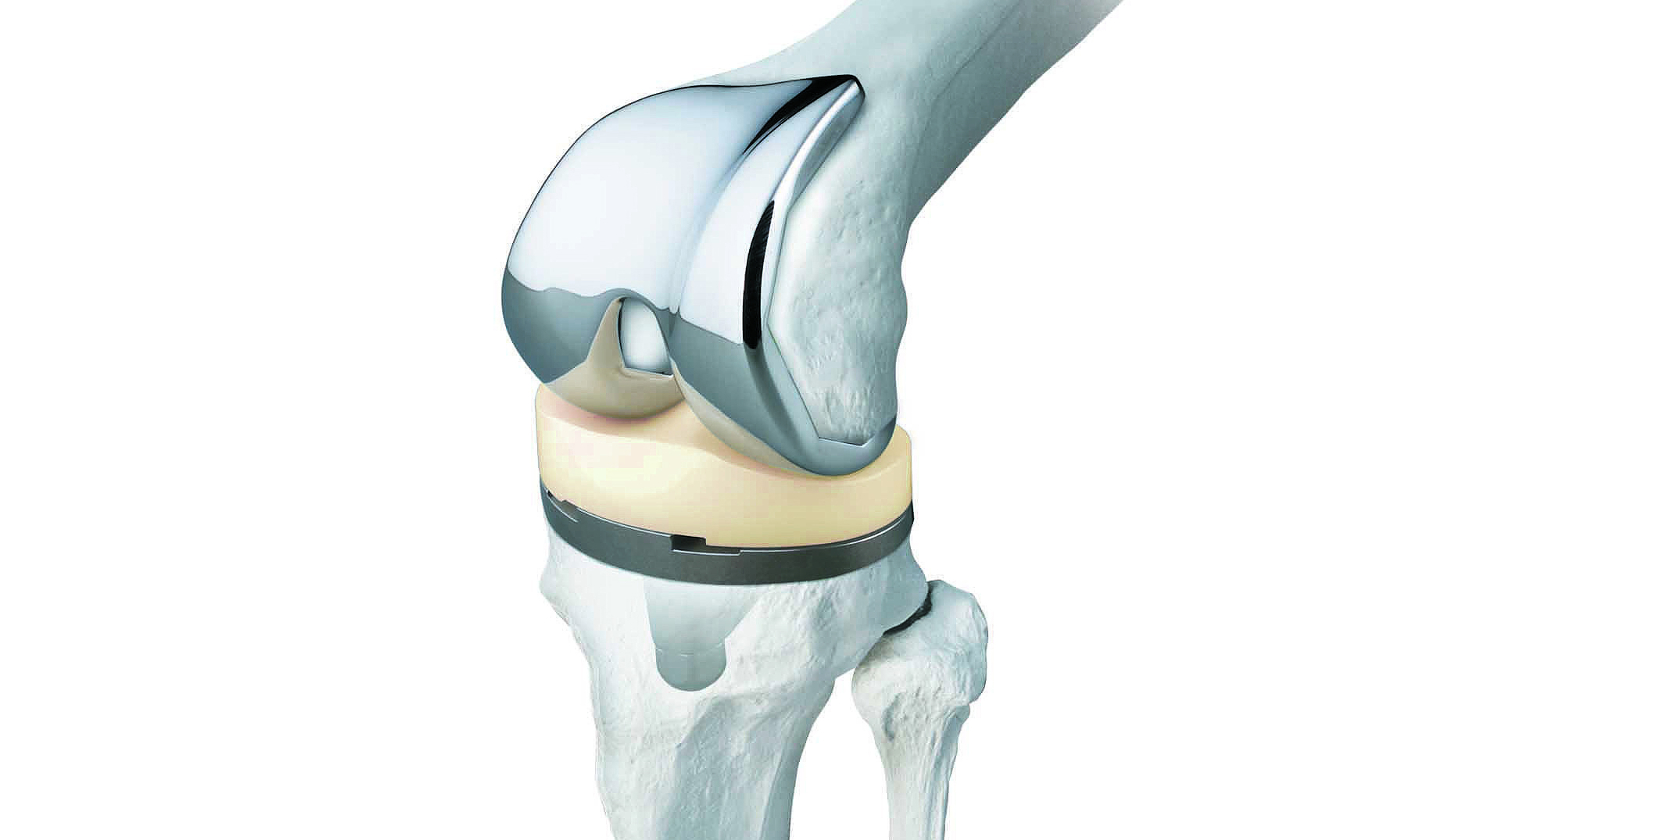 Why Choose The Best Orthopaedic Implants Manufacturers For Your Joint Needs?